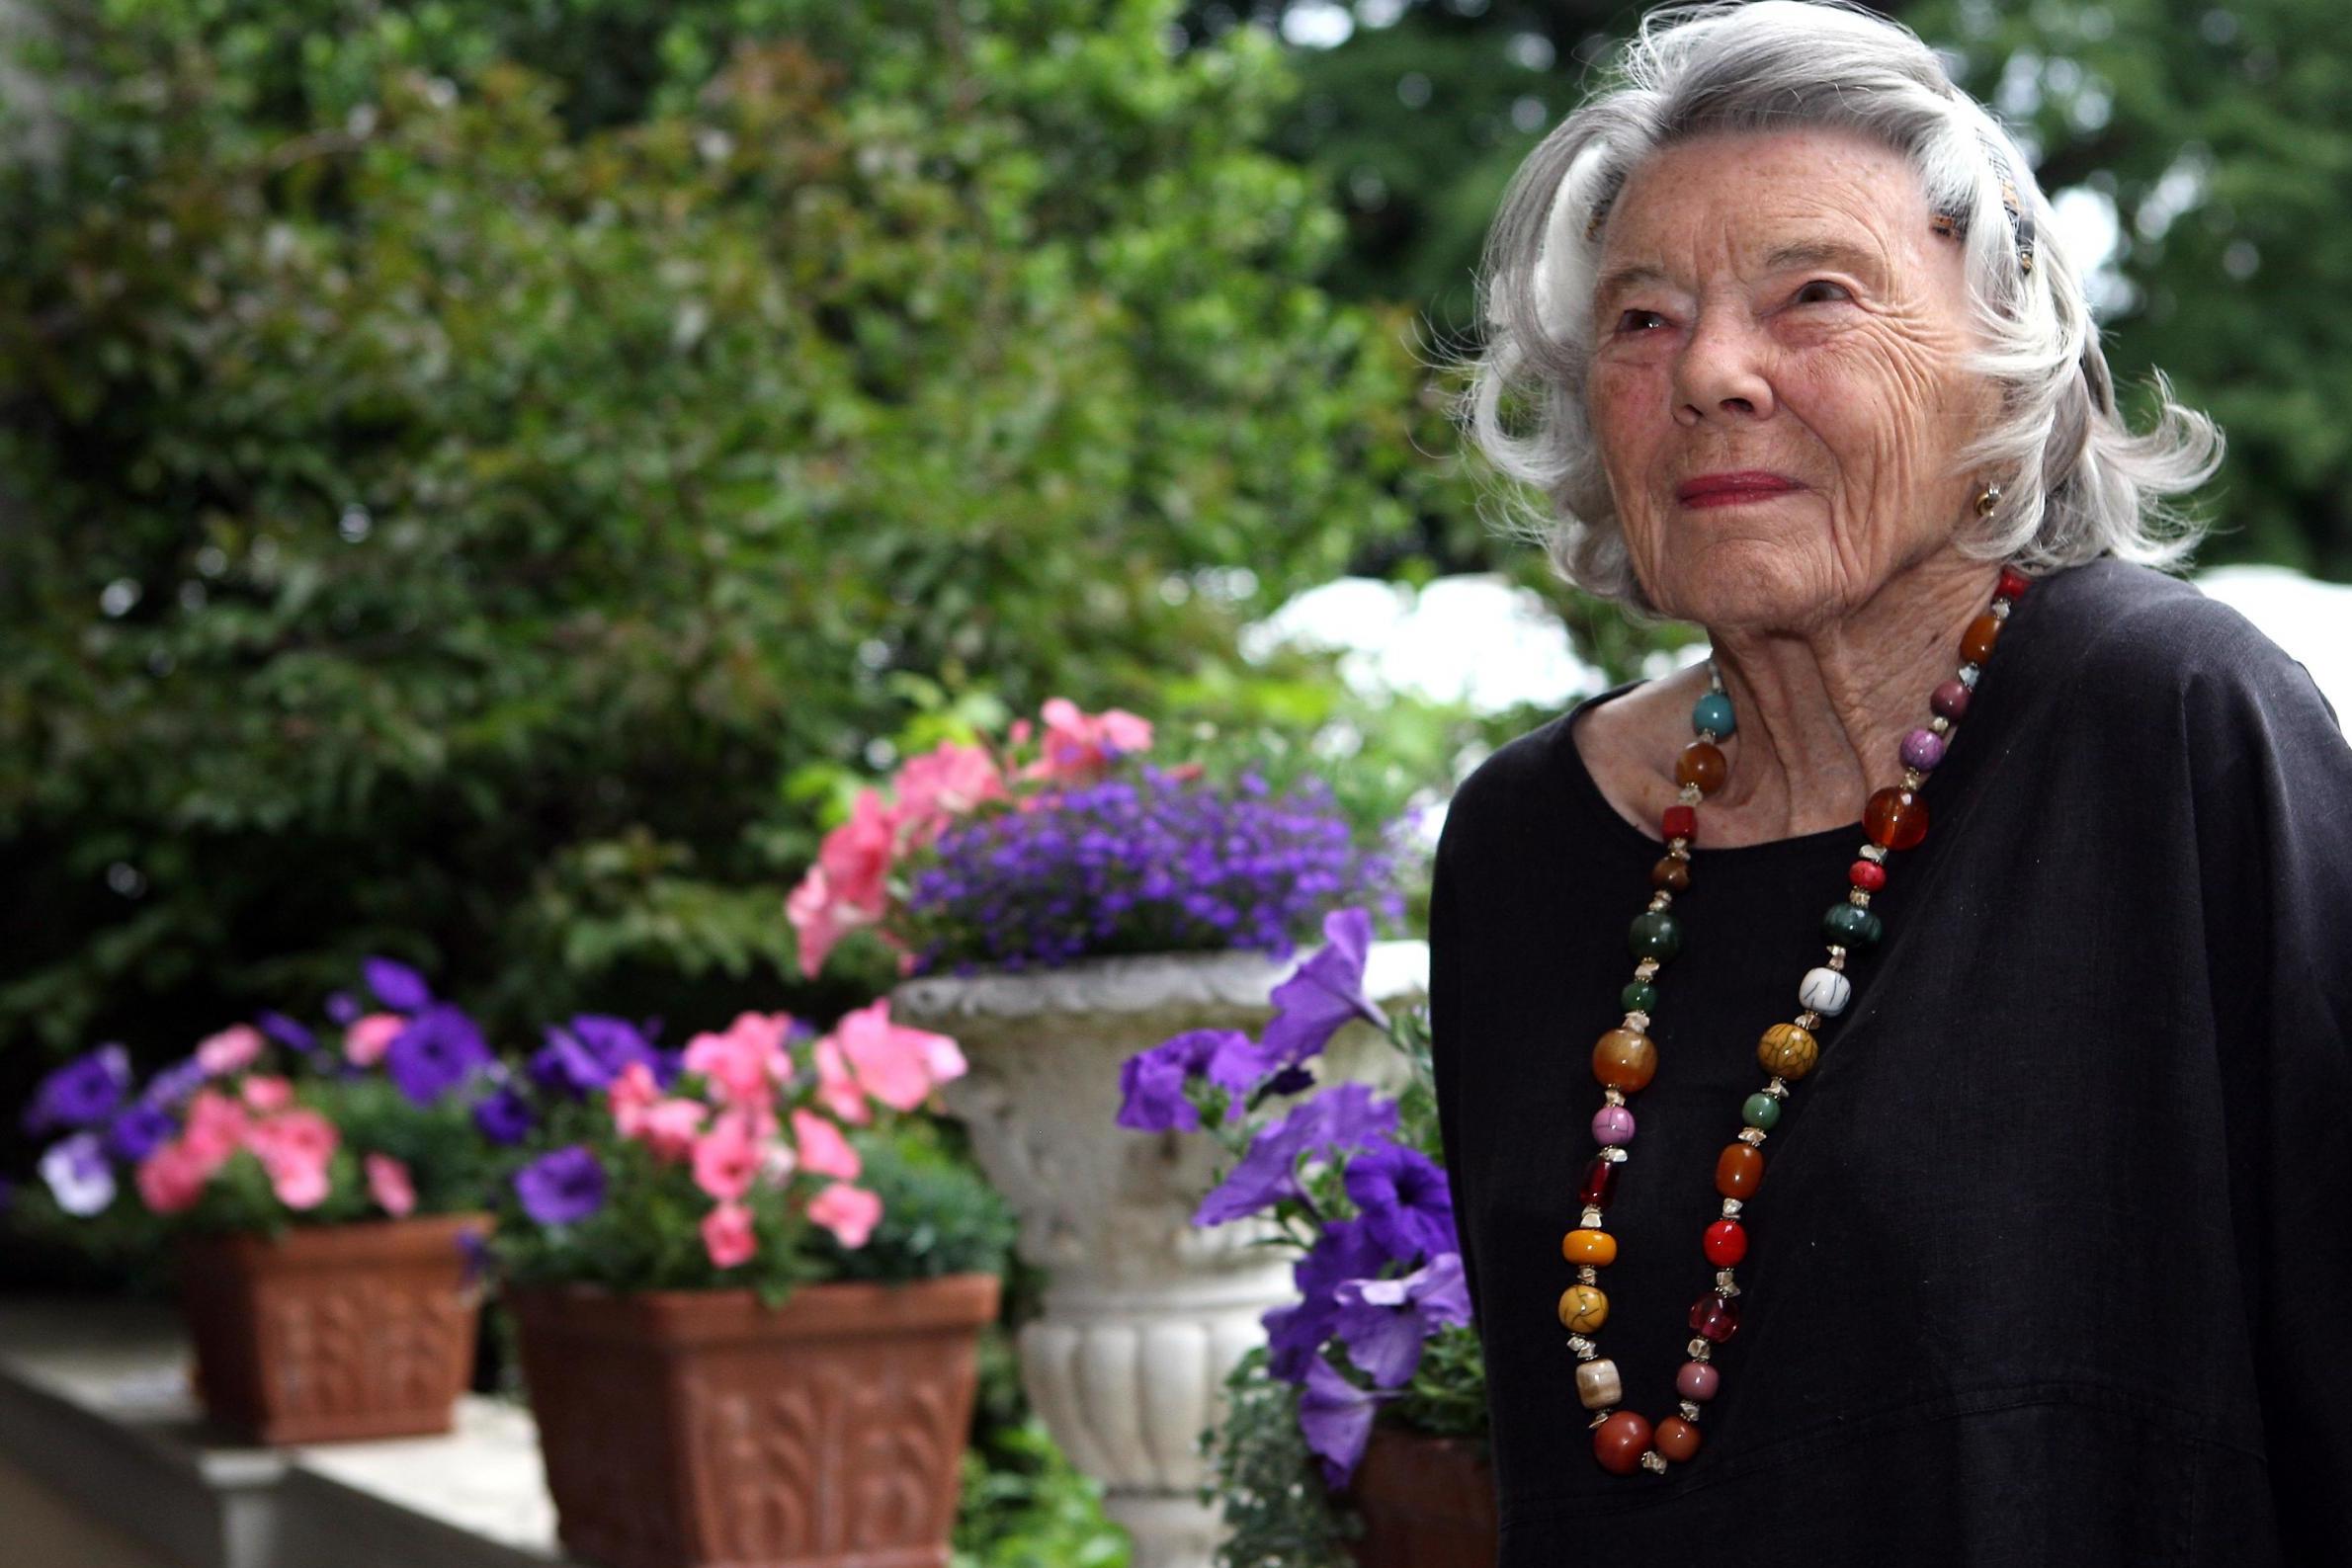 British author Rosamunde Pilcher attends a garden party at the official residence of the British ambassador to Germany on 7 June, 2012 in Berlin, Germany.